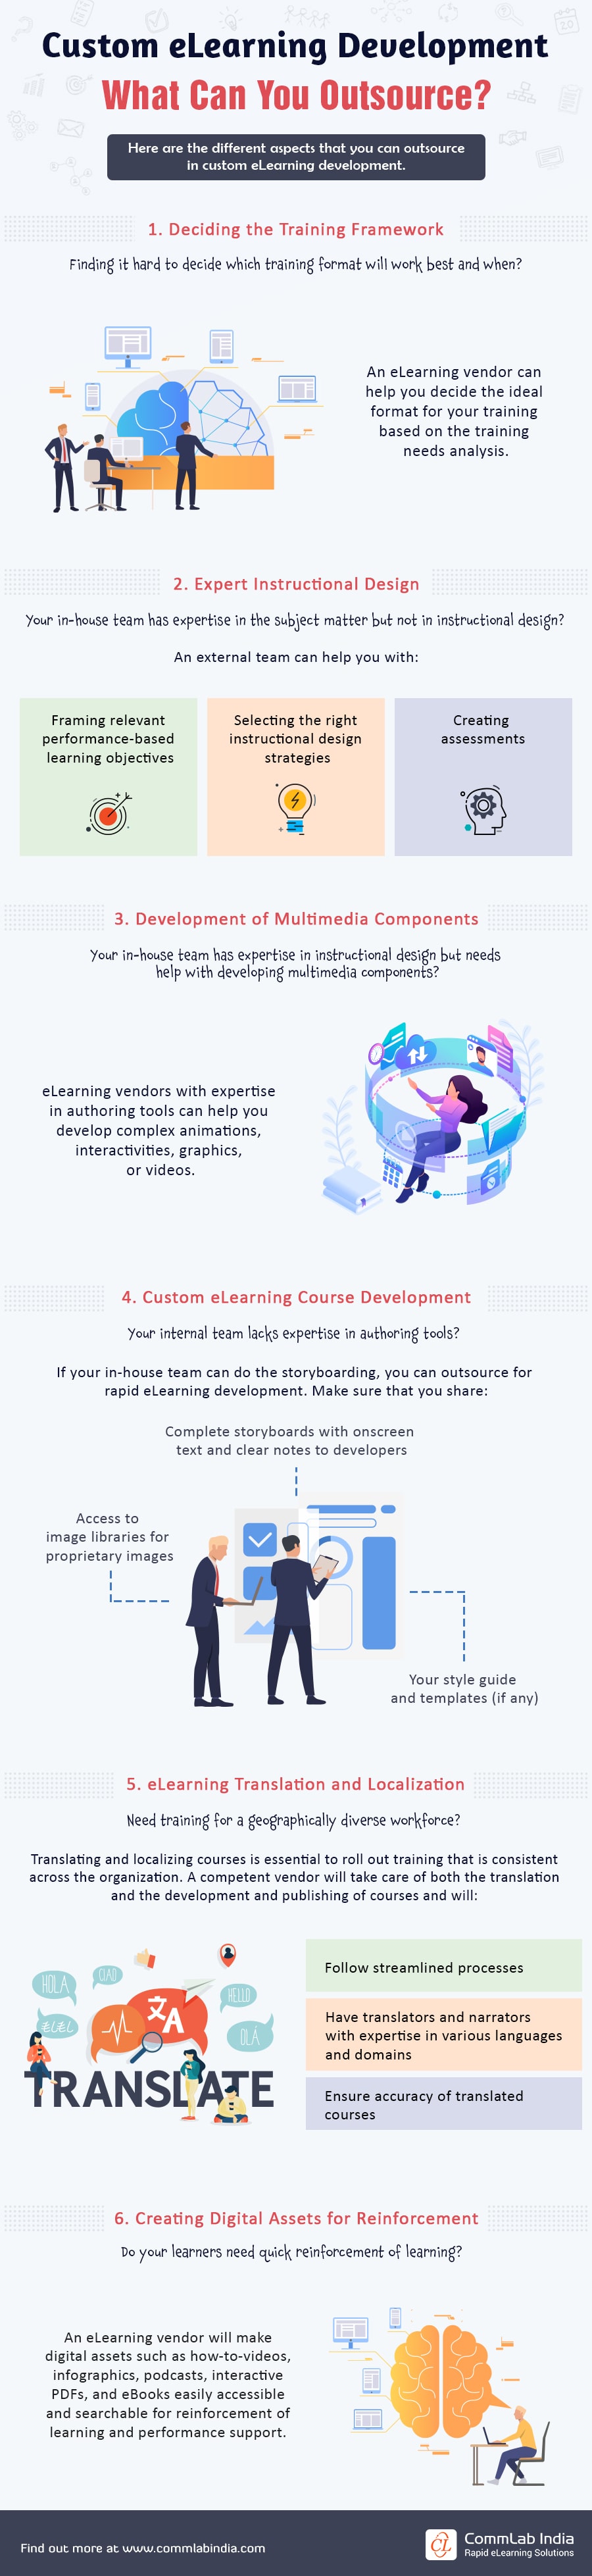 Custom eLearning Development: Components that can be Outsourced